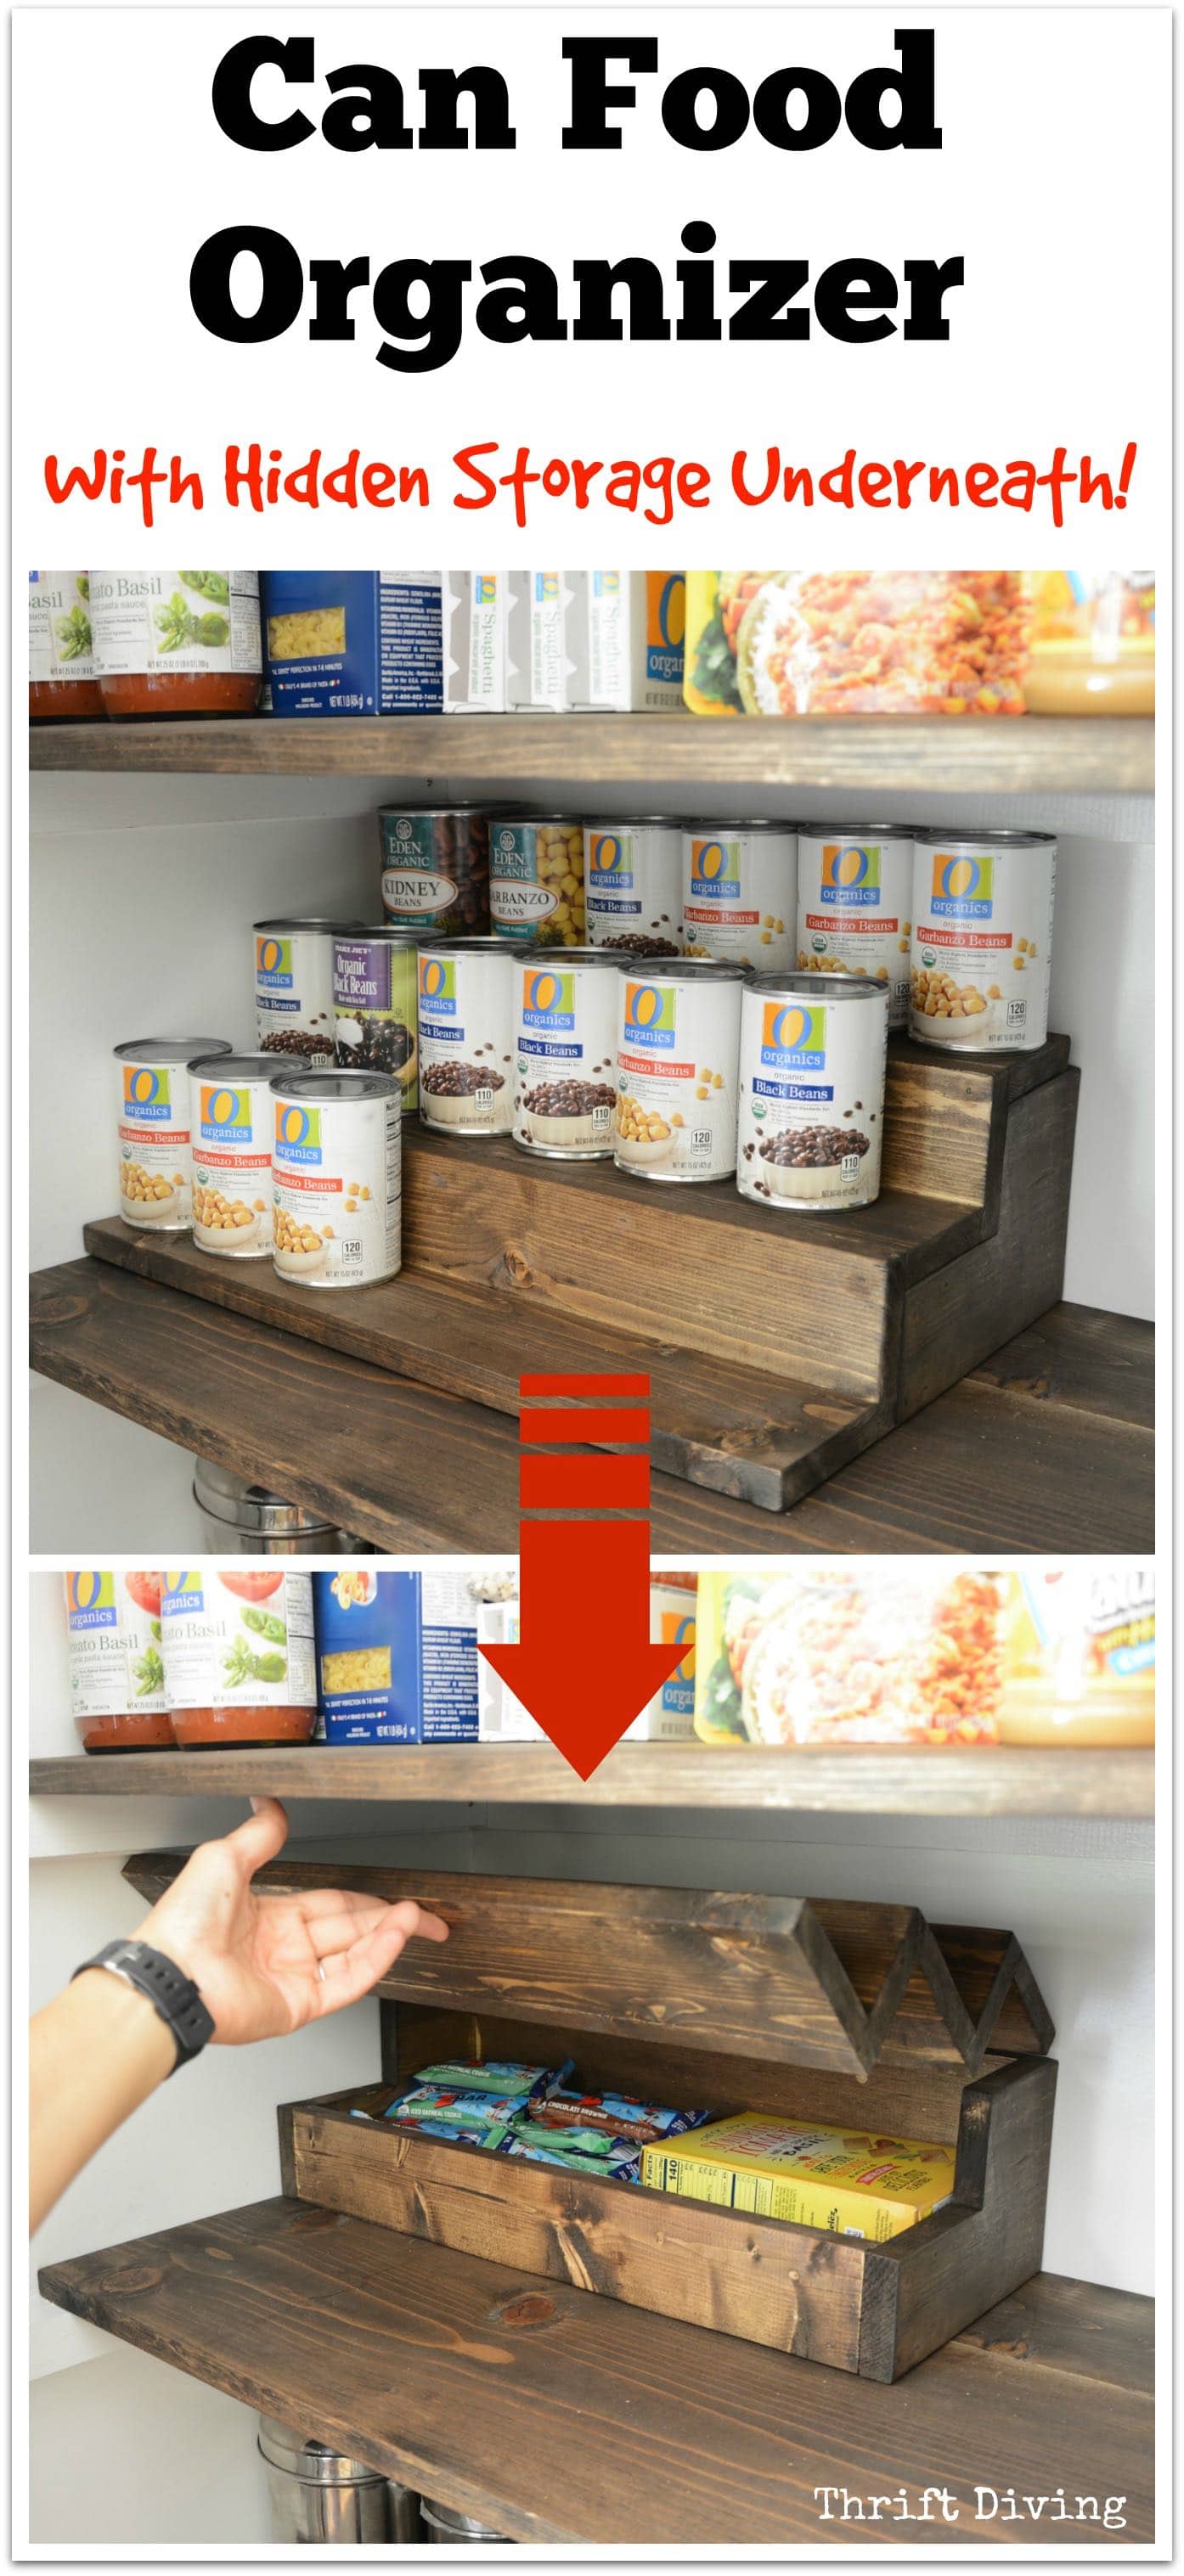 Learn how to make a can food organizer with hidden story underneath! - Thrift Diving